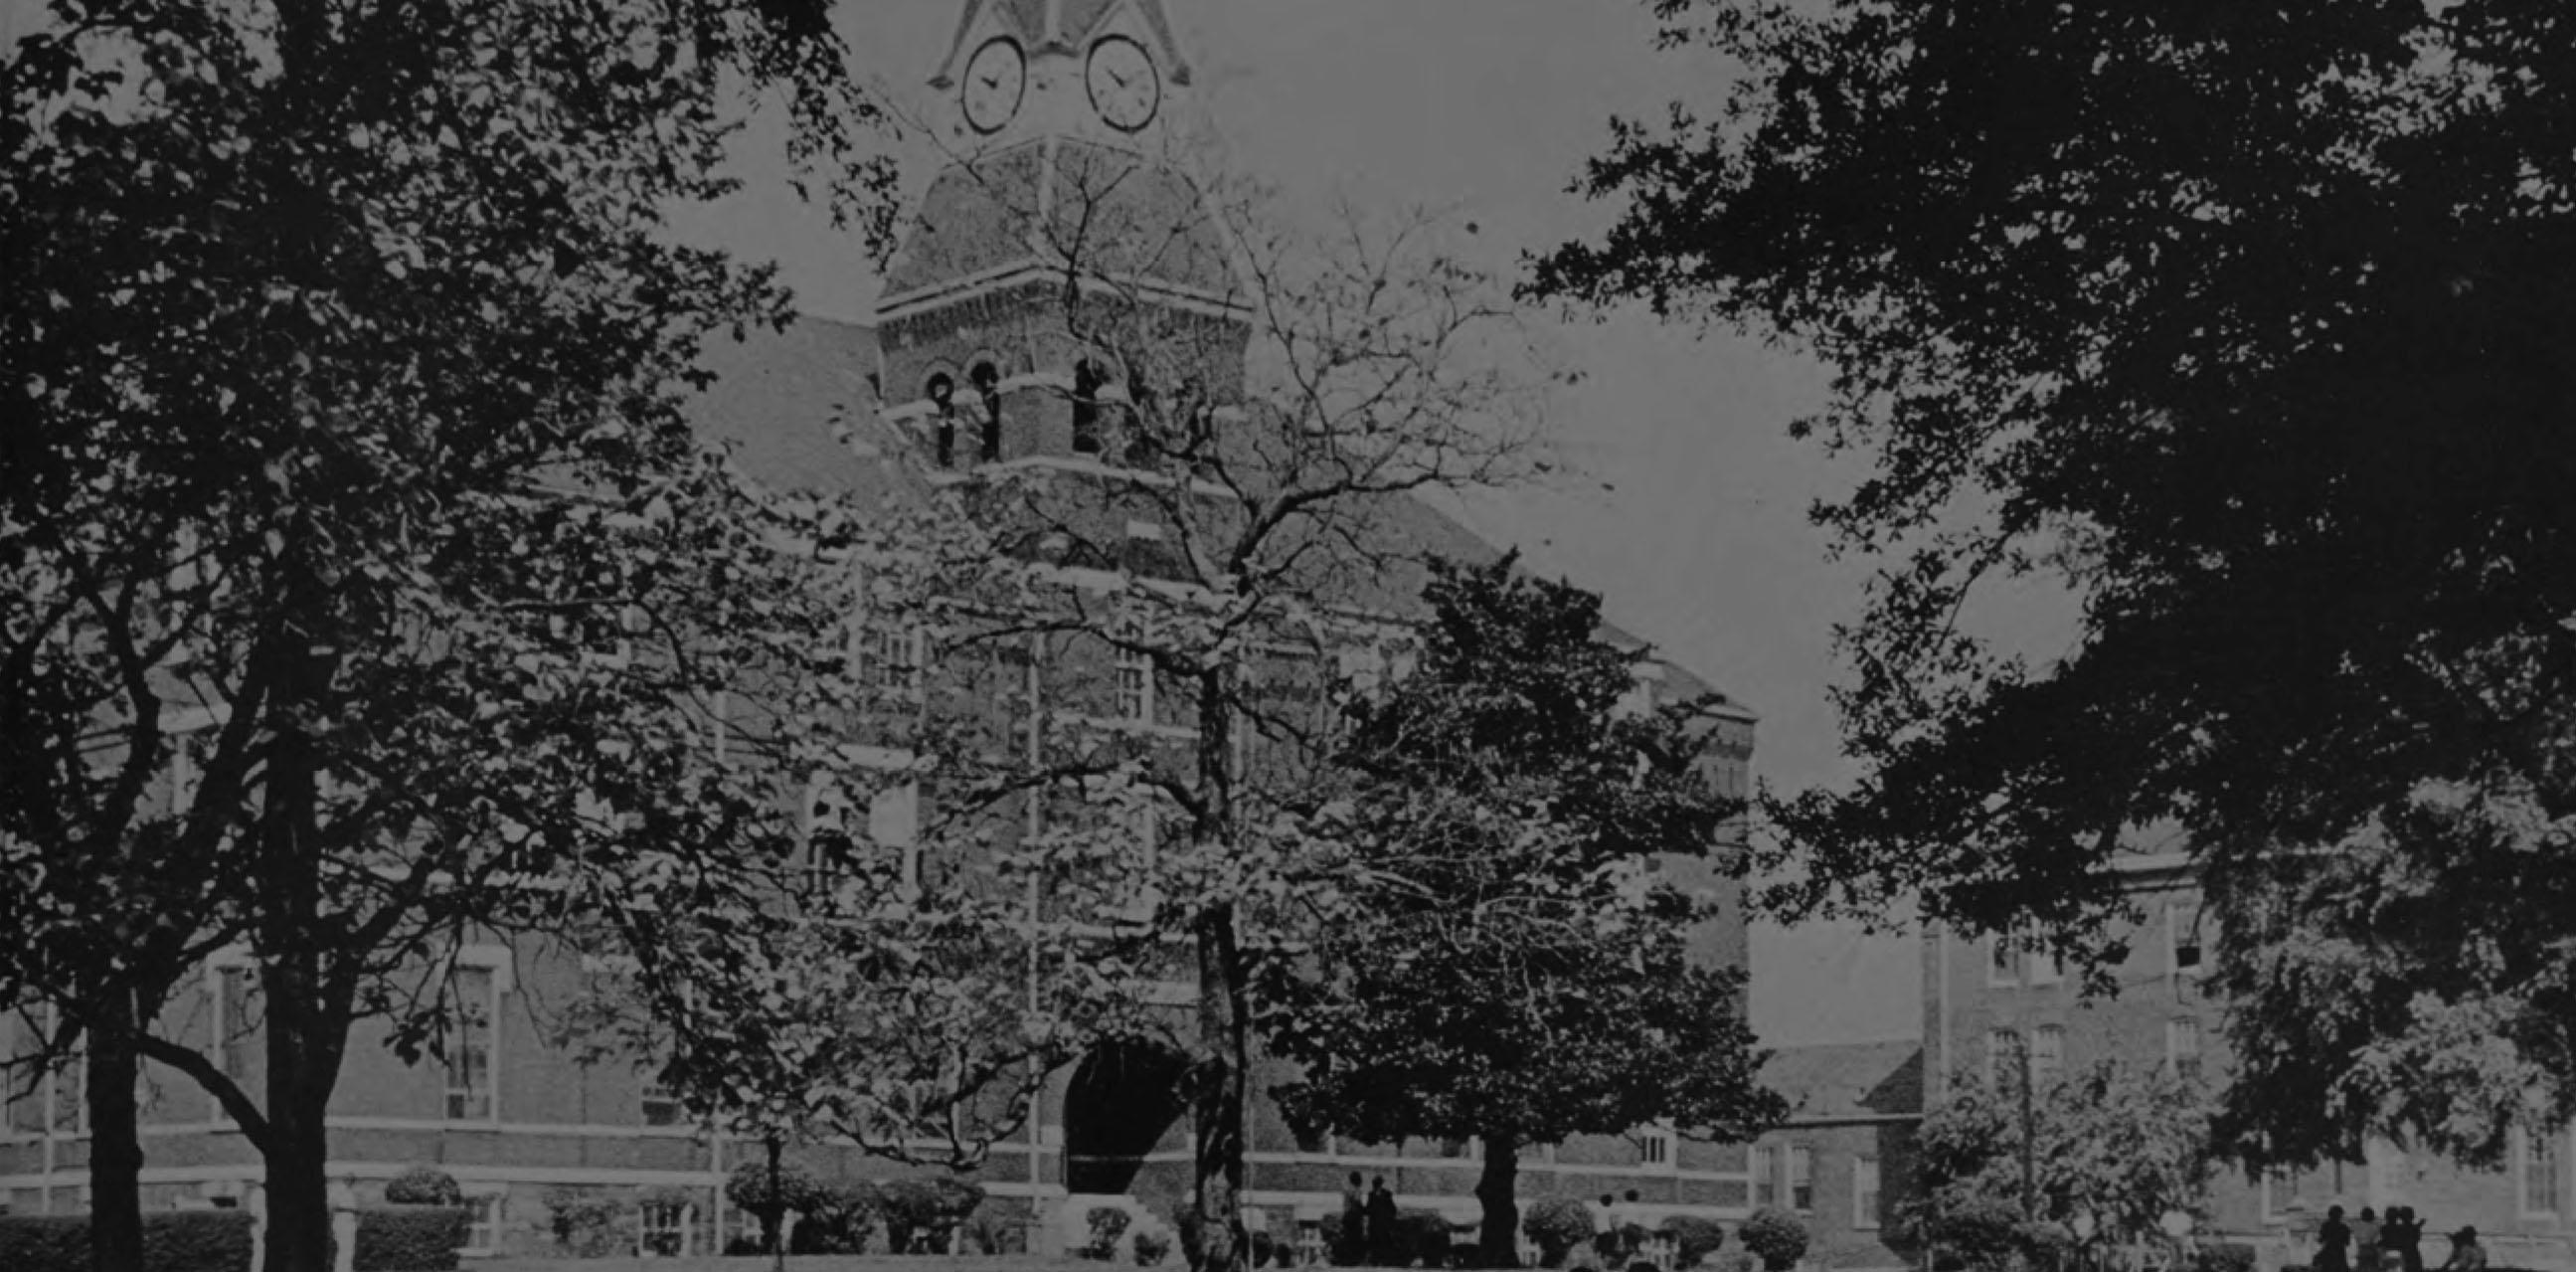 Morris Brown College, a private, liberal arts institution located in Atlanta, Georgia, was founded in 1881 by the African Methodist Episcopal (A.M.E.) Church for the 